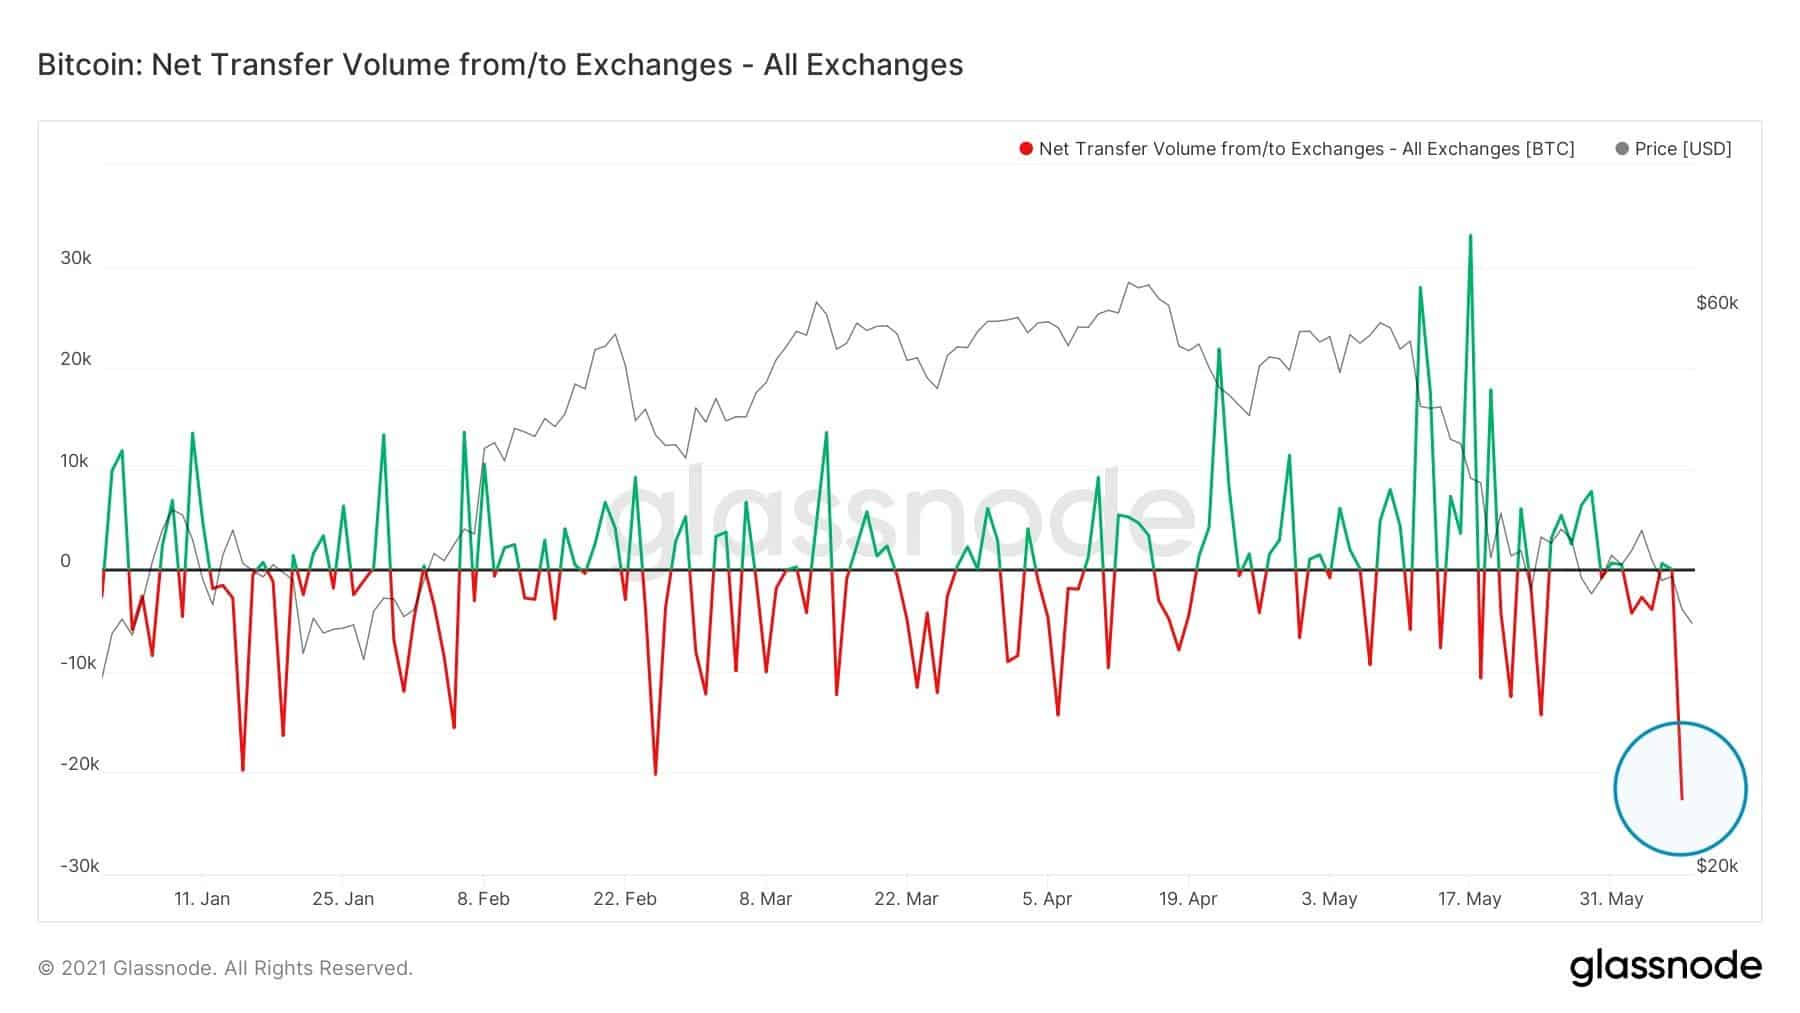 Bitcoin Inflows and Outflows from Exchanges. Source: Glassnode